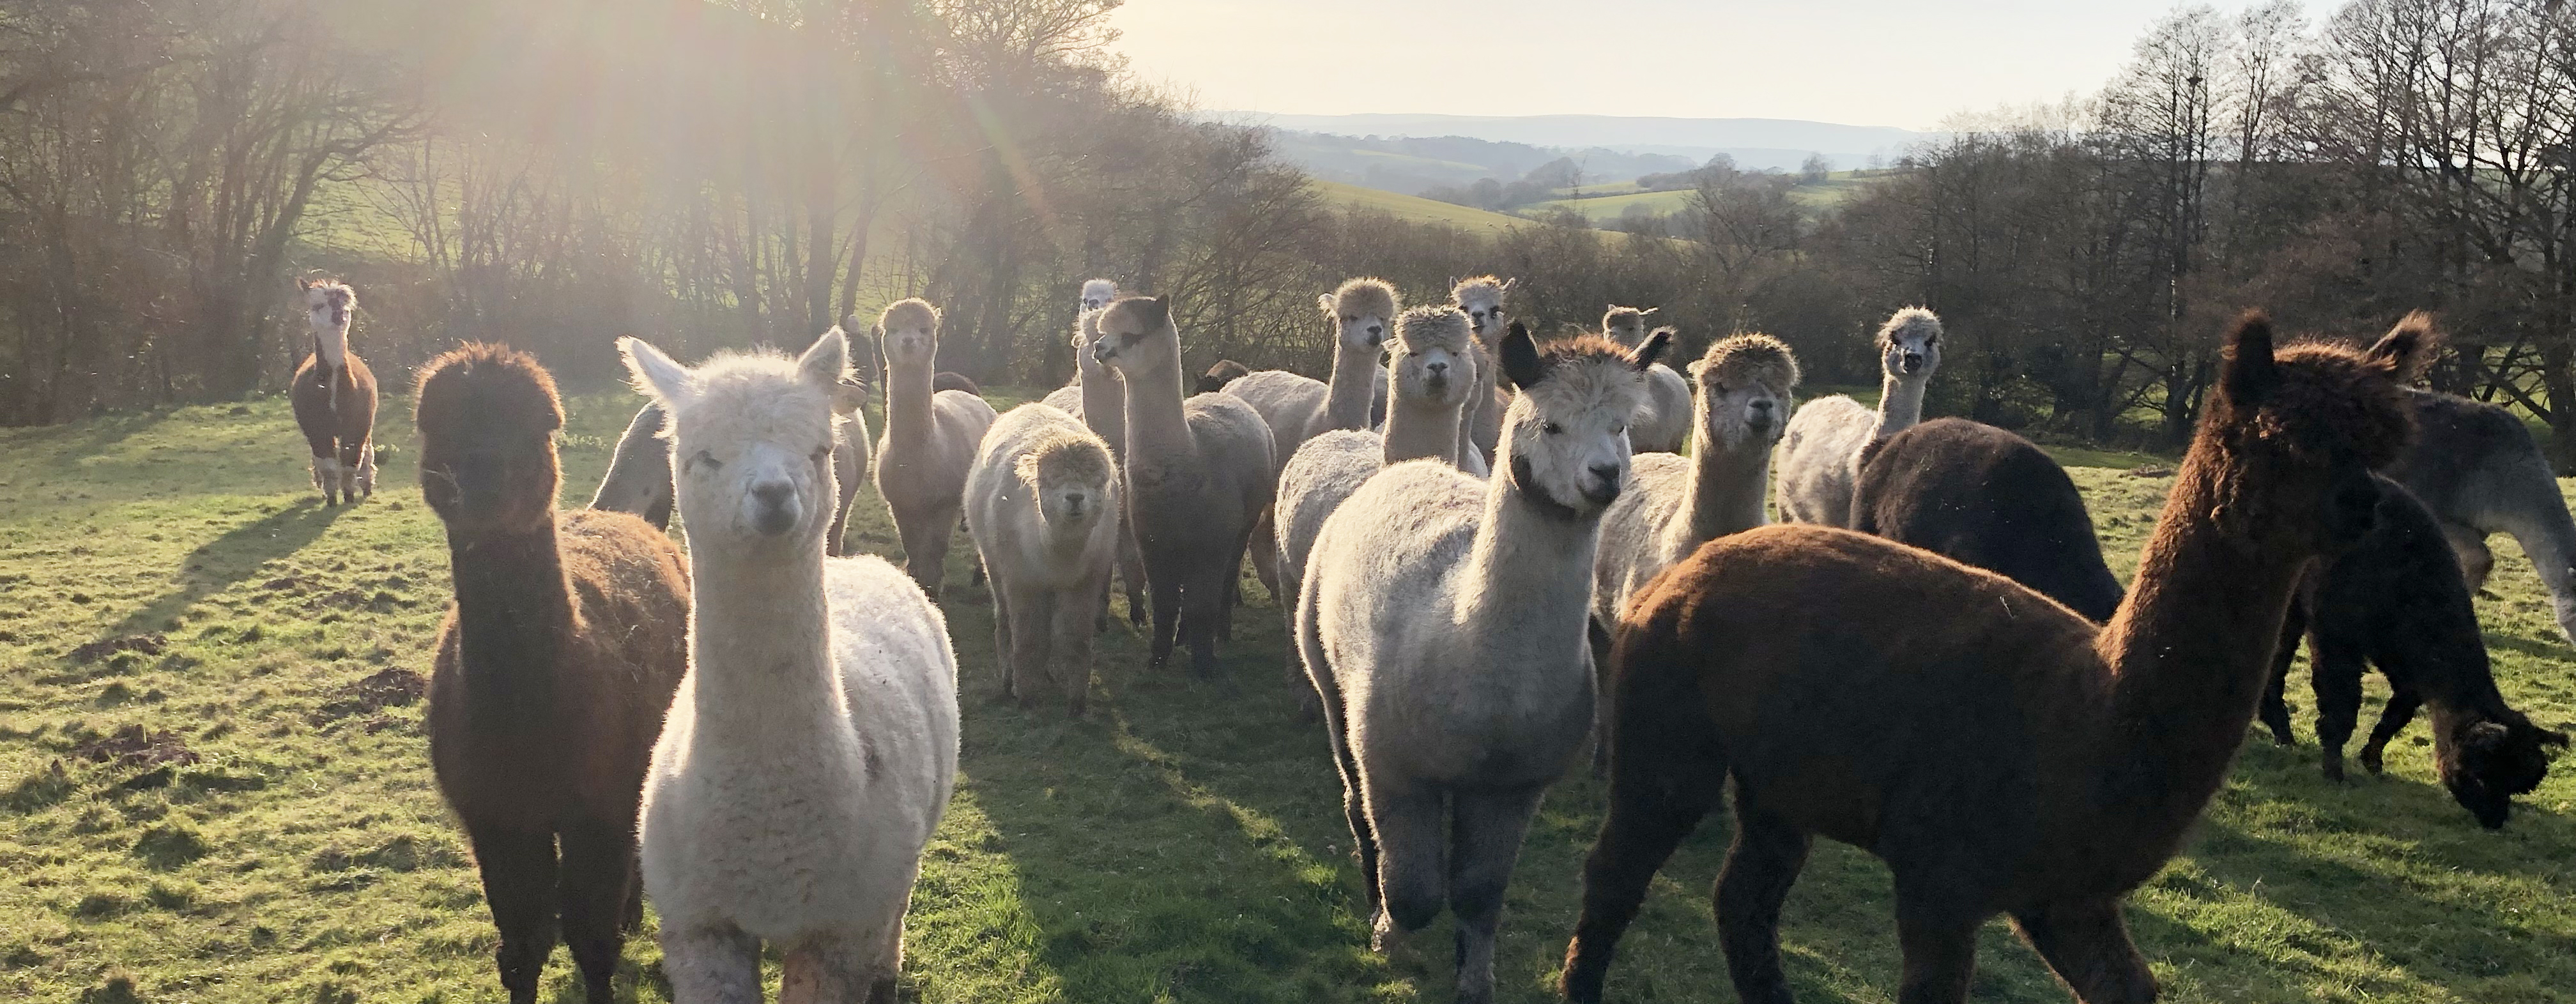 Our alpaca herd on a sunny morning in South Wales, UK